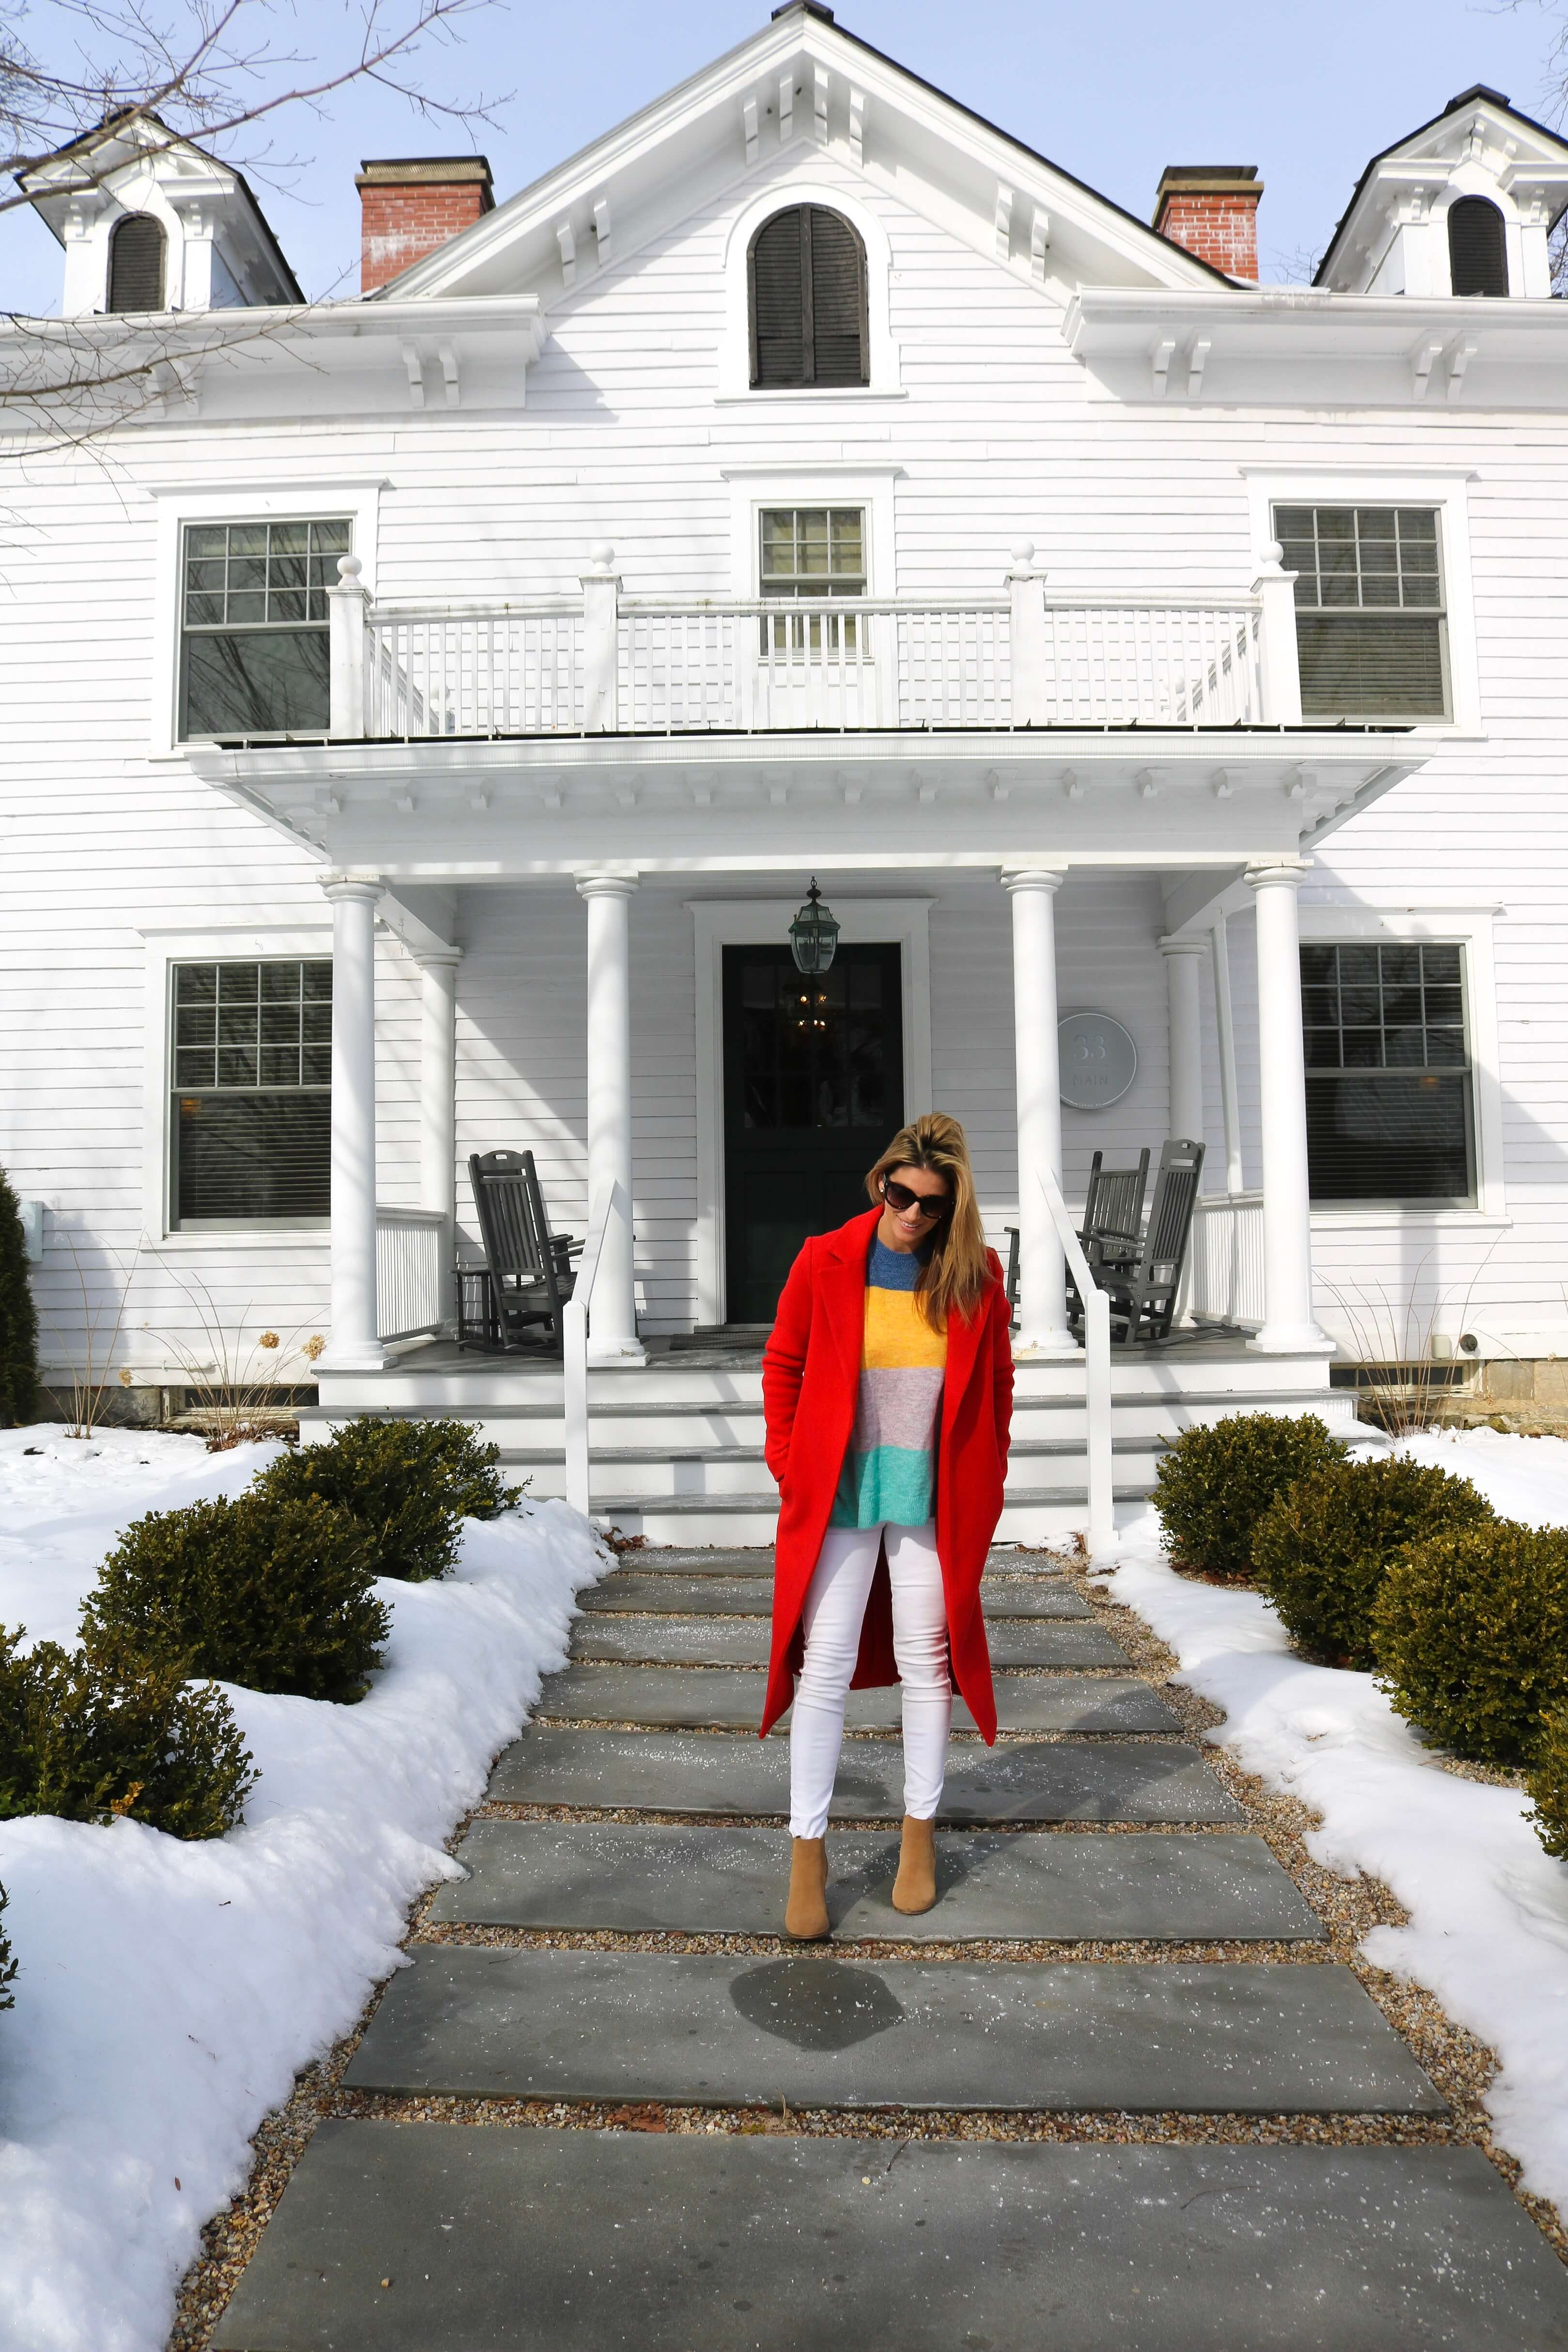 Travel review of The Berkshires and our stay at 33 Main sparkleshinylove